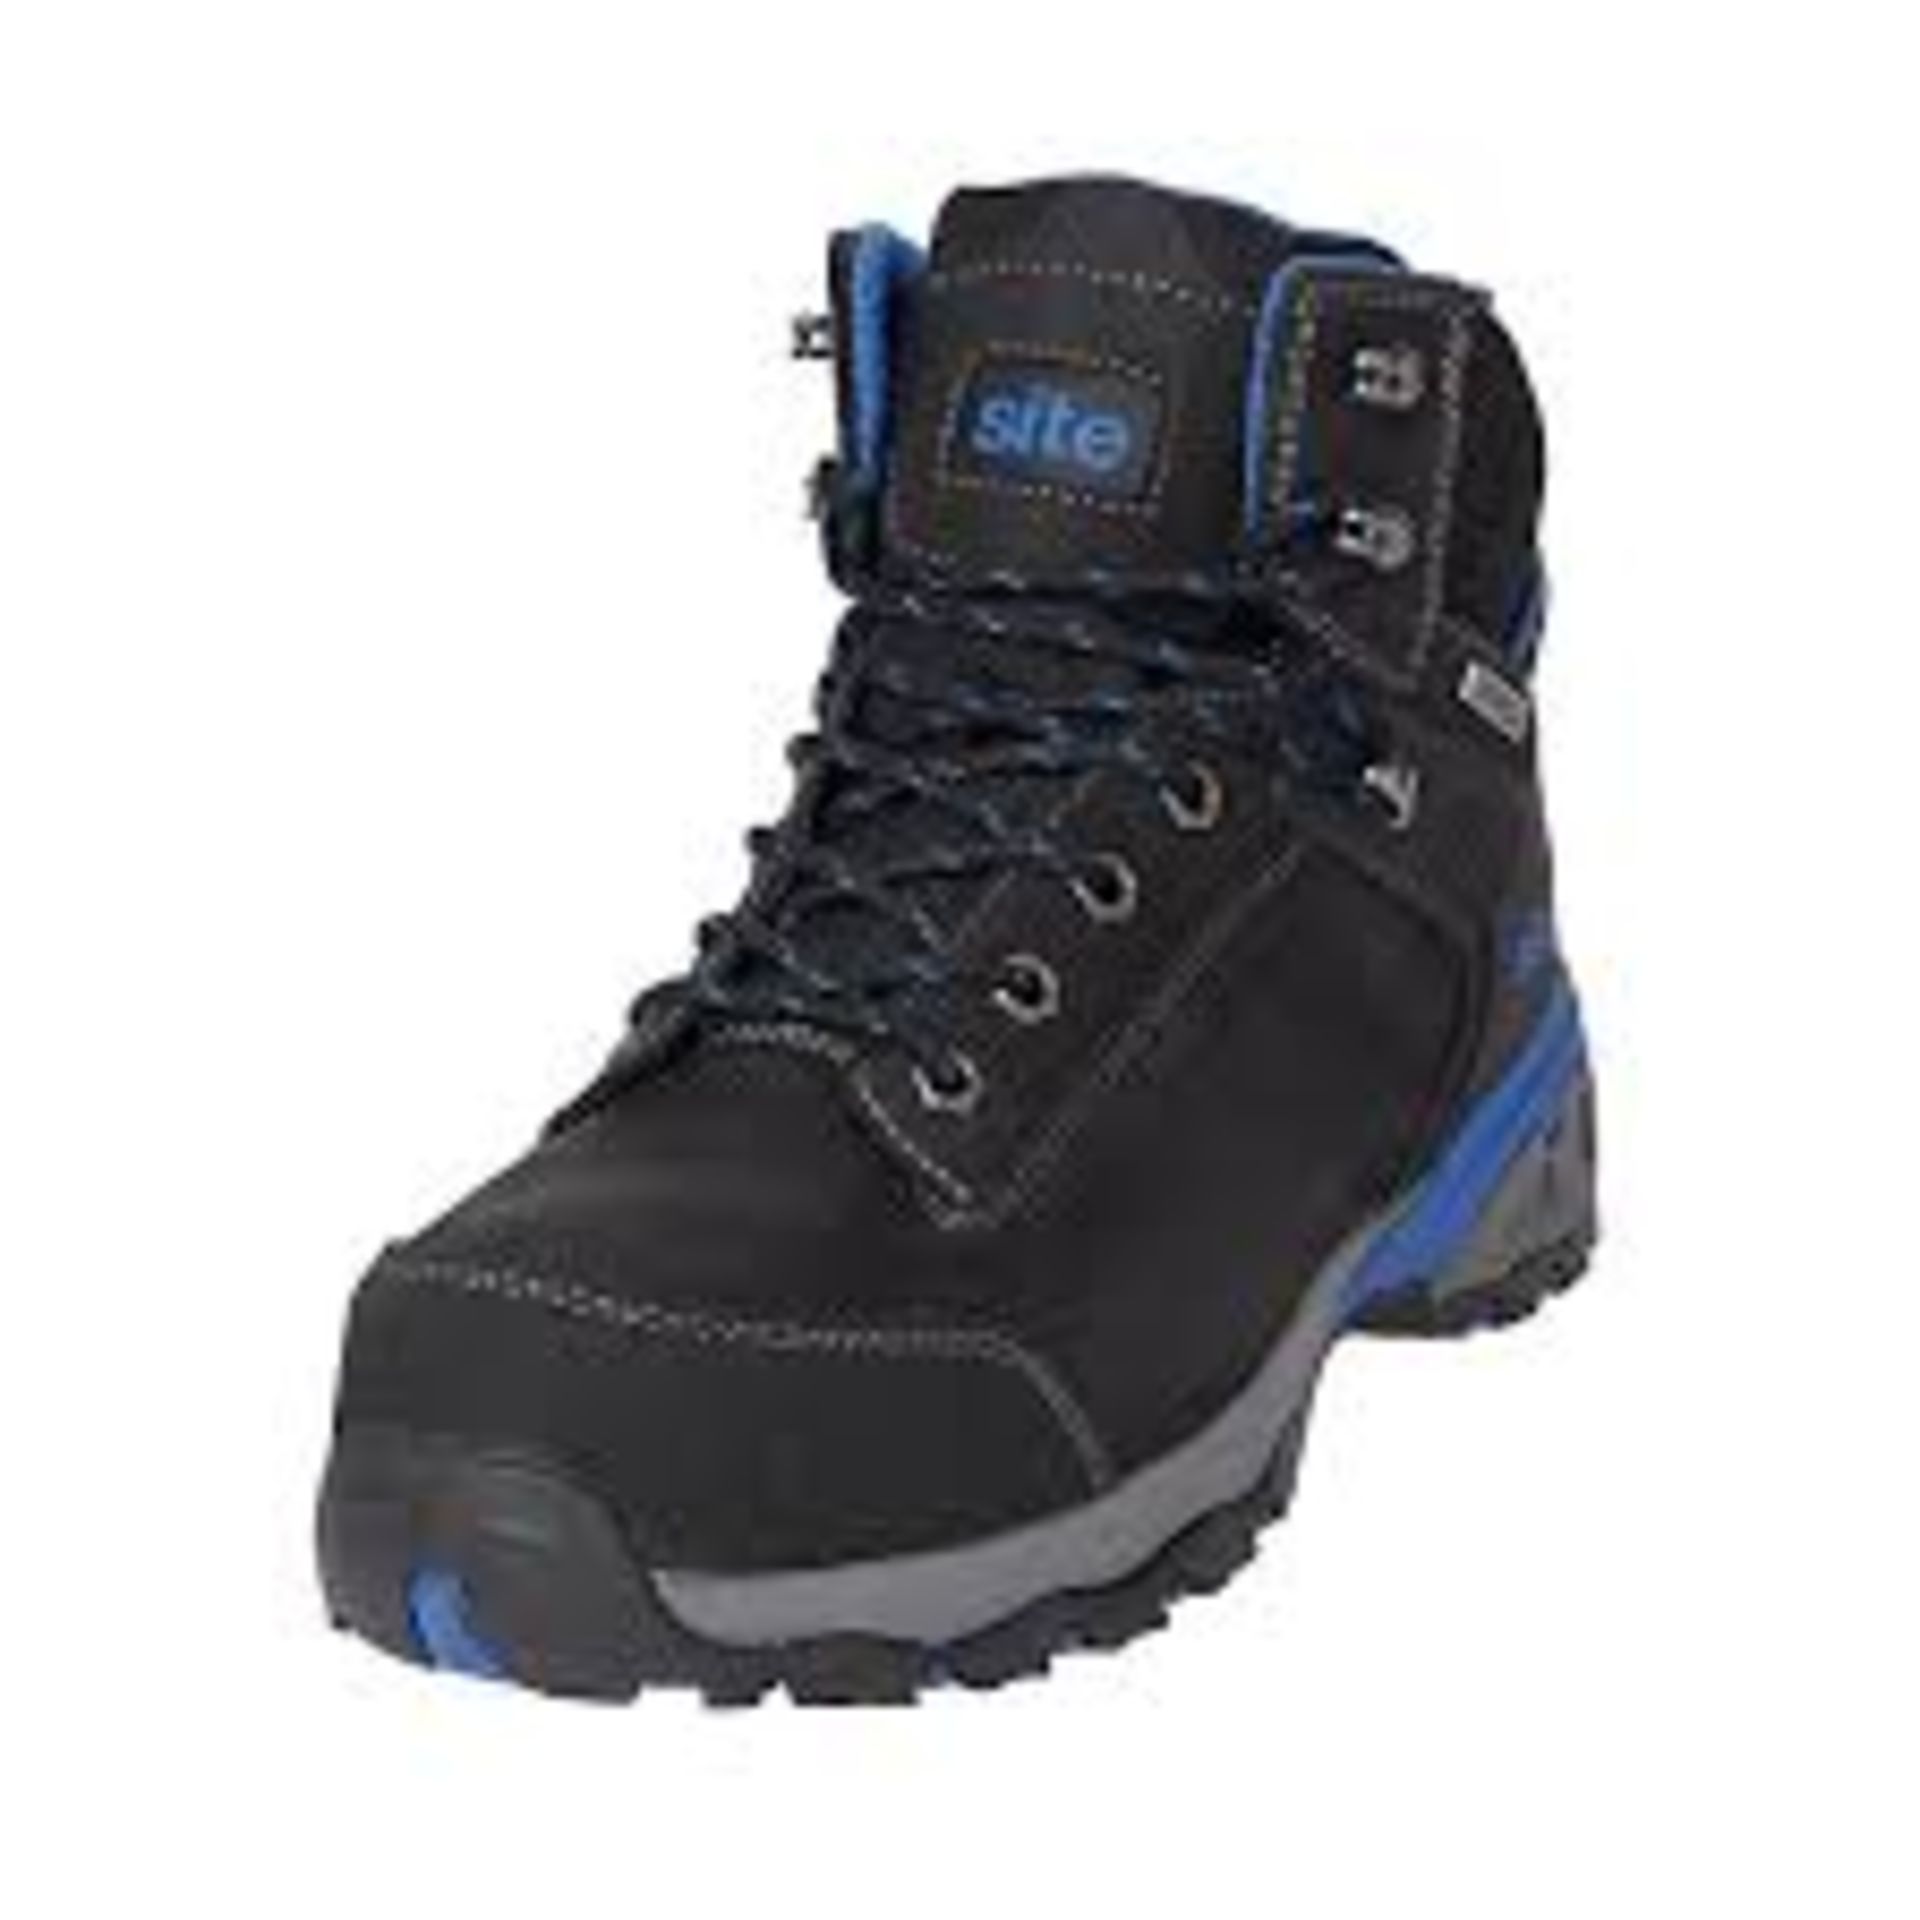 Site Thorite Unisex Black & blue Safety boots Size 9. - S1.5.